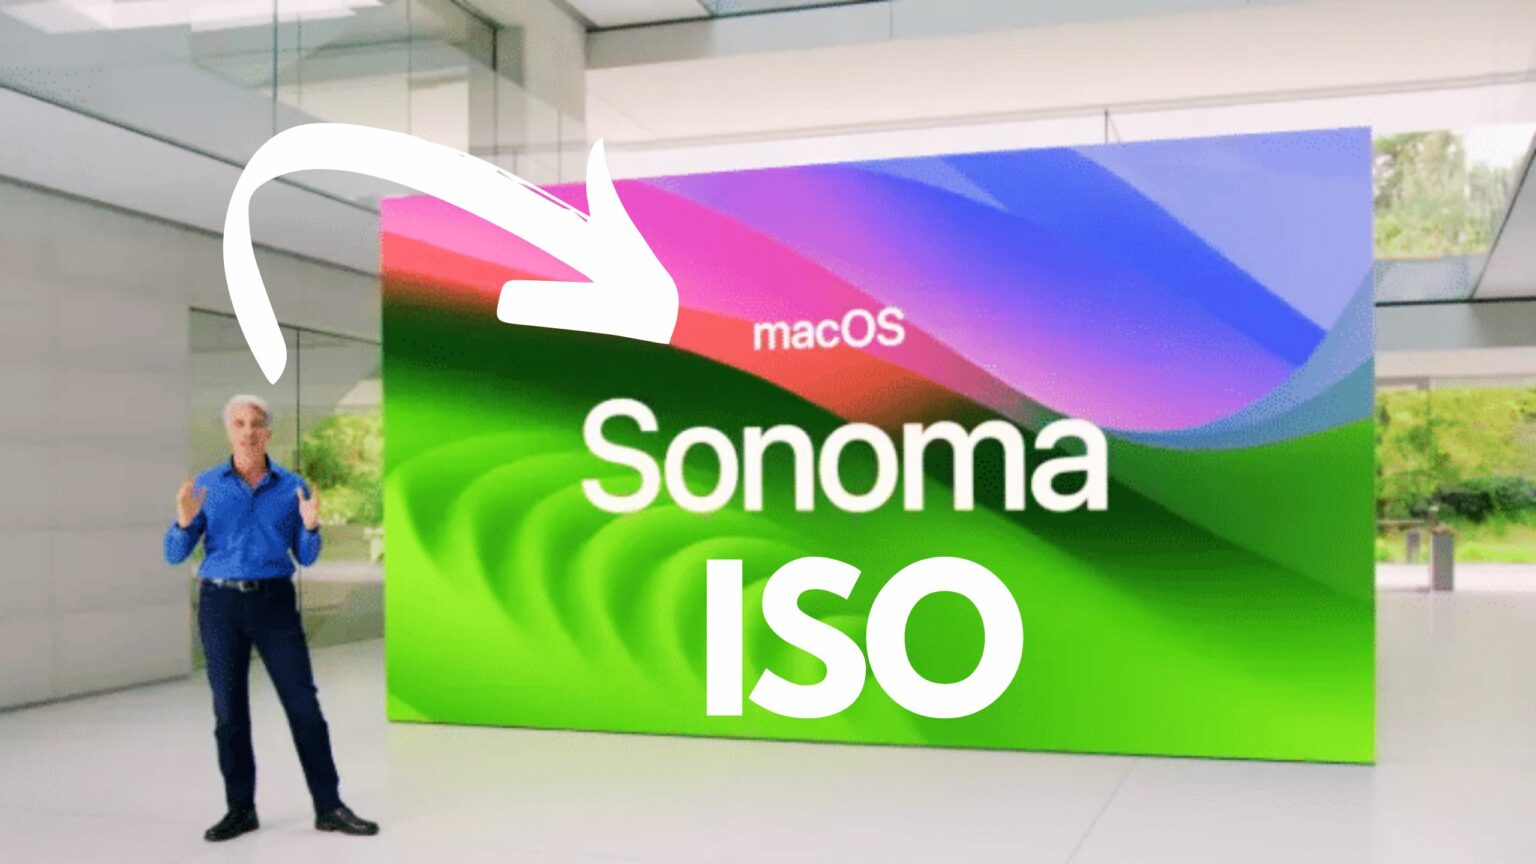 macos sonoma download iso